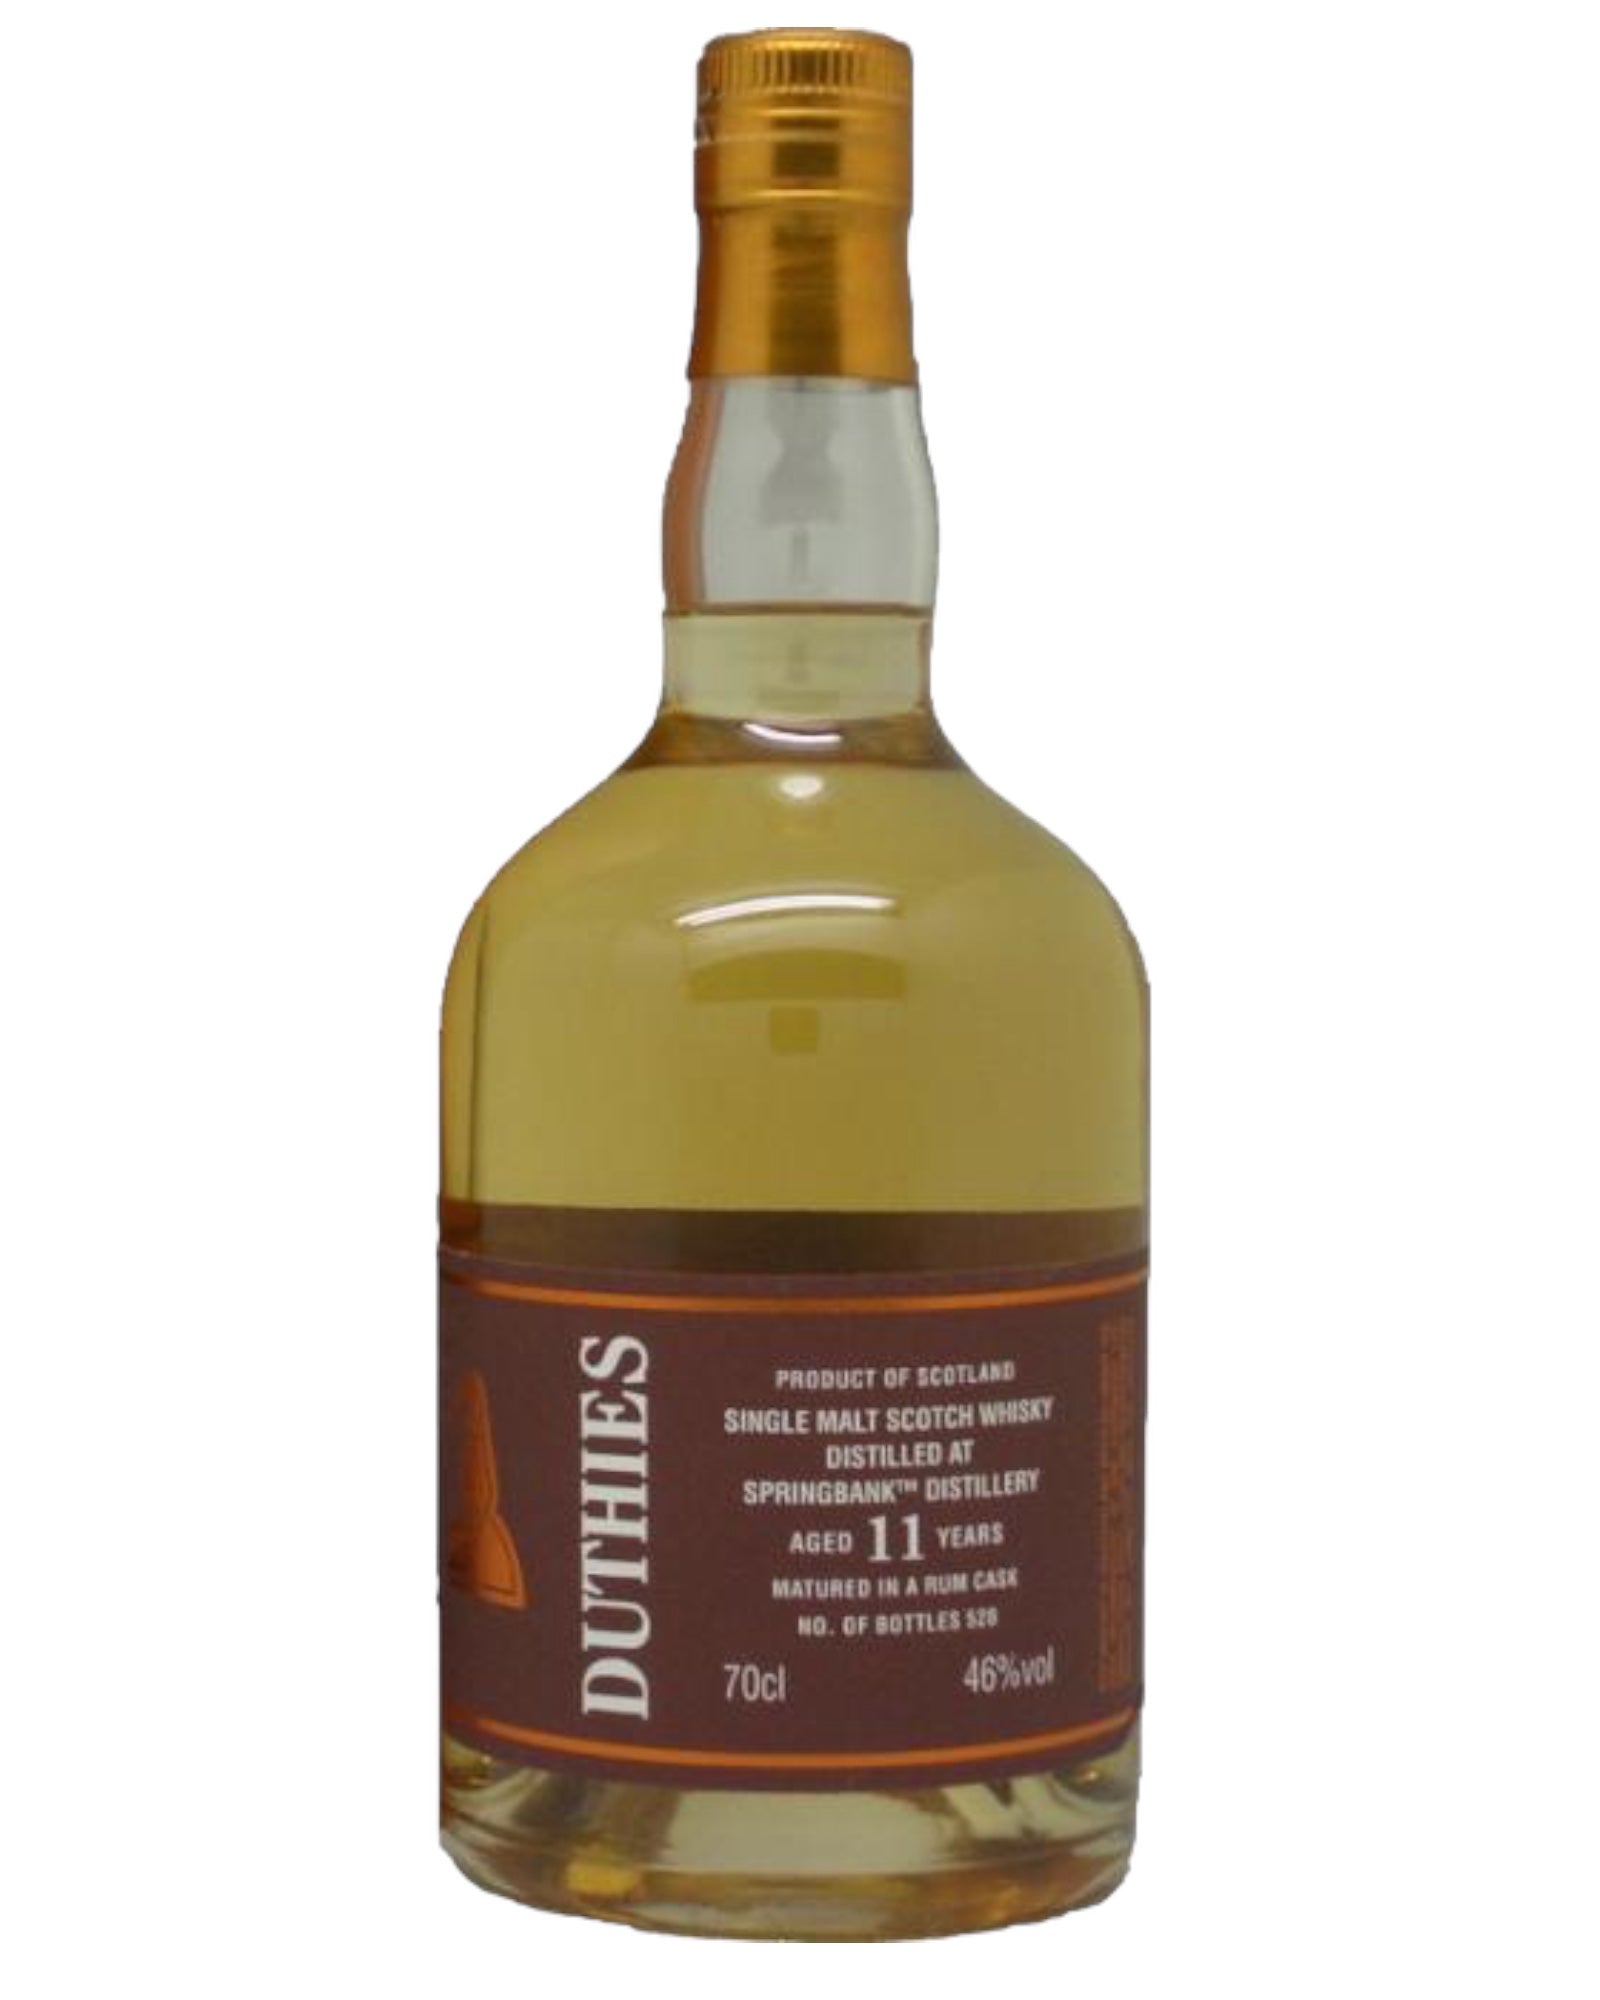 Springbank Duthies 11 Year Old